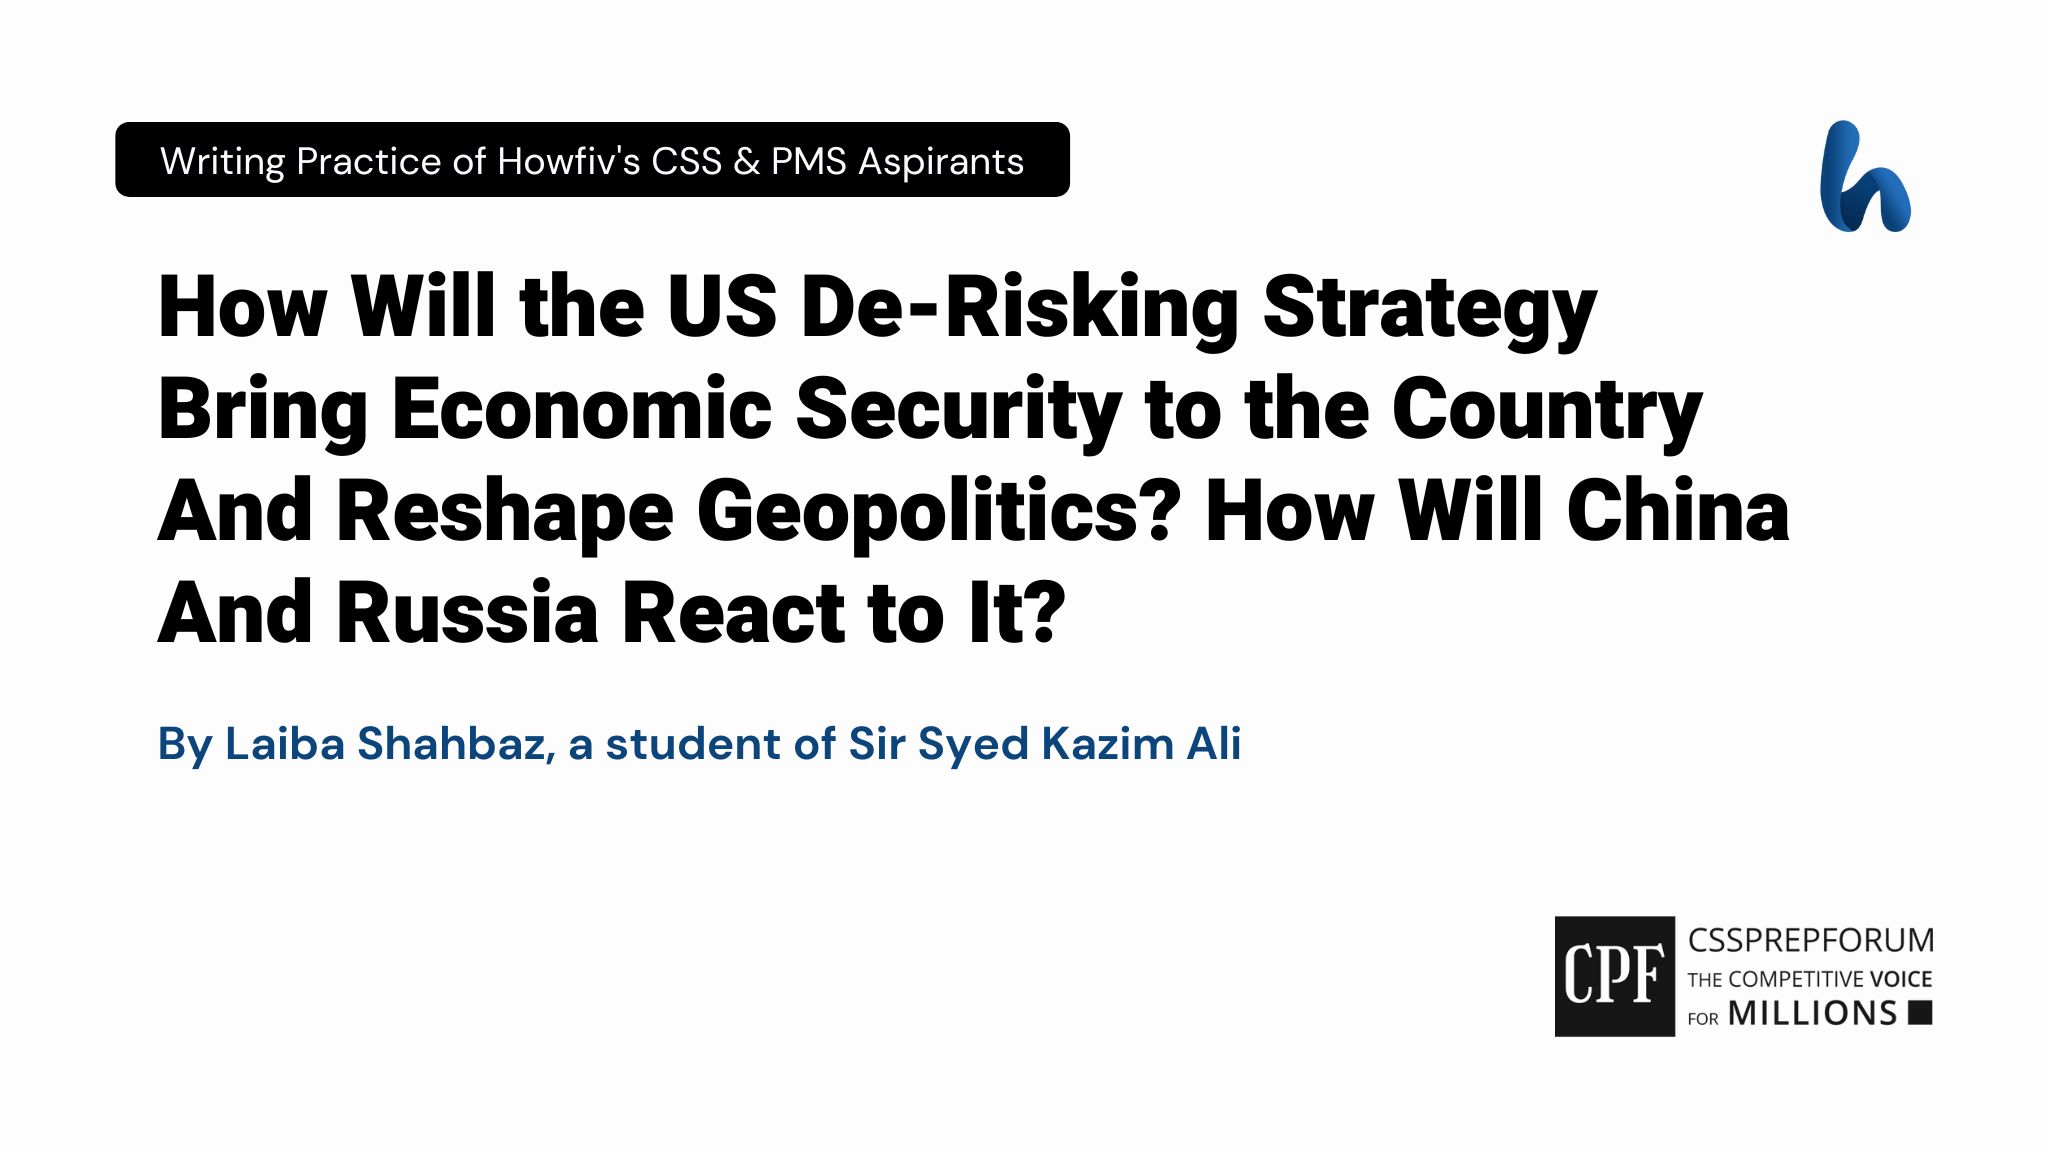 How will the US De-Risking Strategy Bring Economic Security to The Country And Reshape Geopolitics? How Will China And Russia React to It? byLaiba Shahbaz